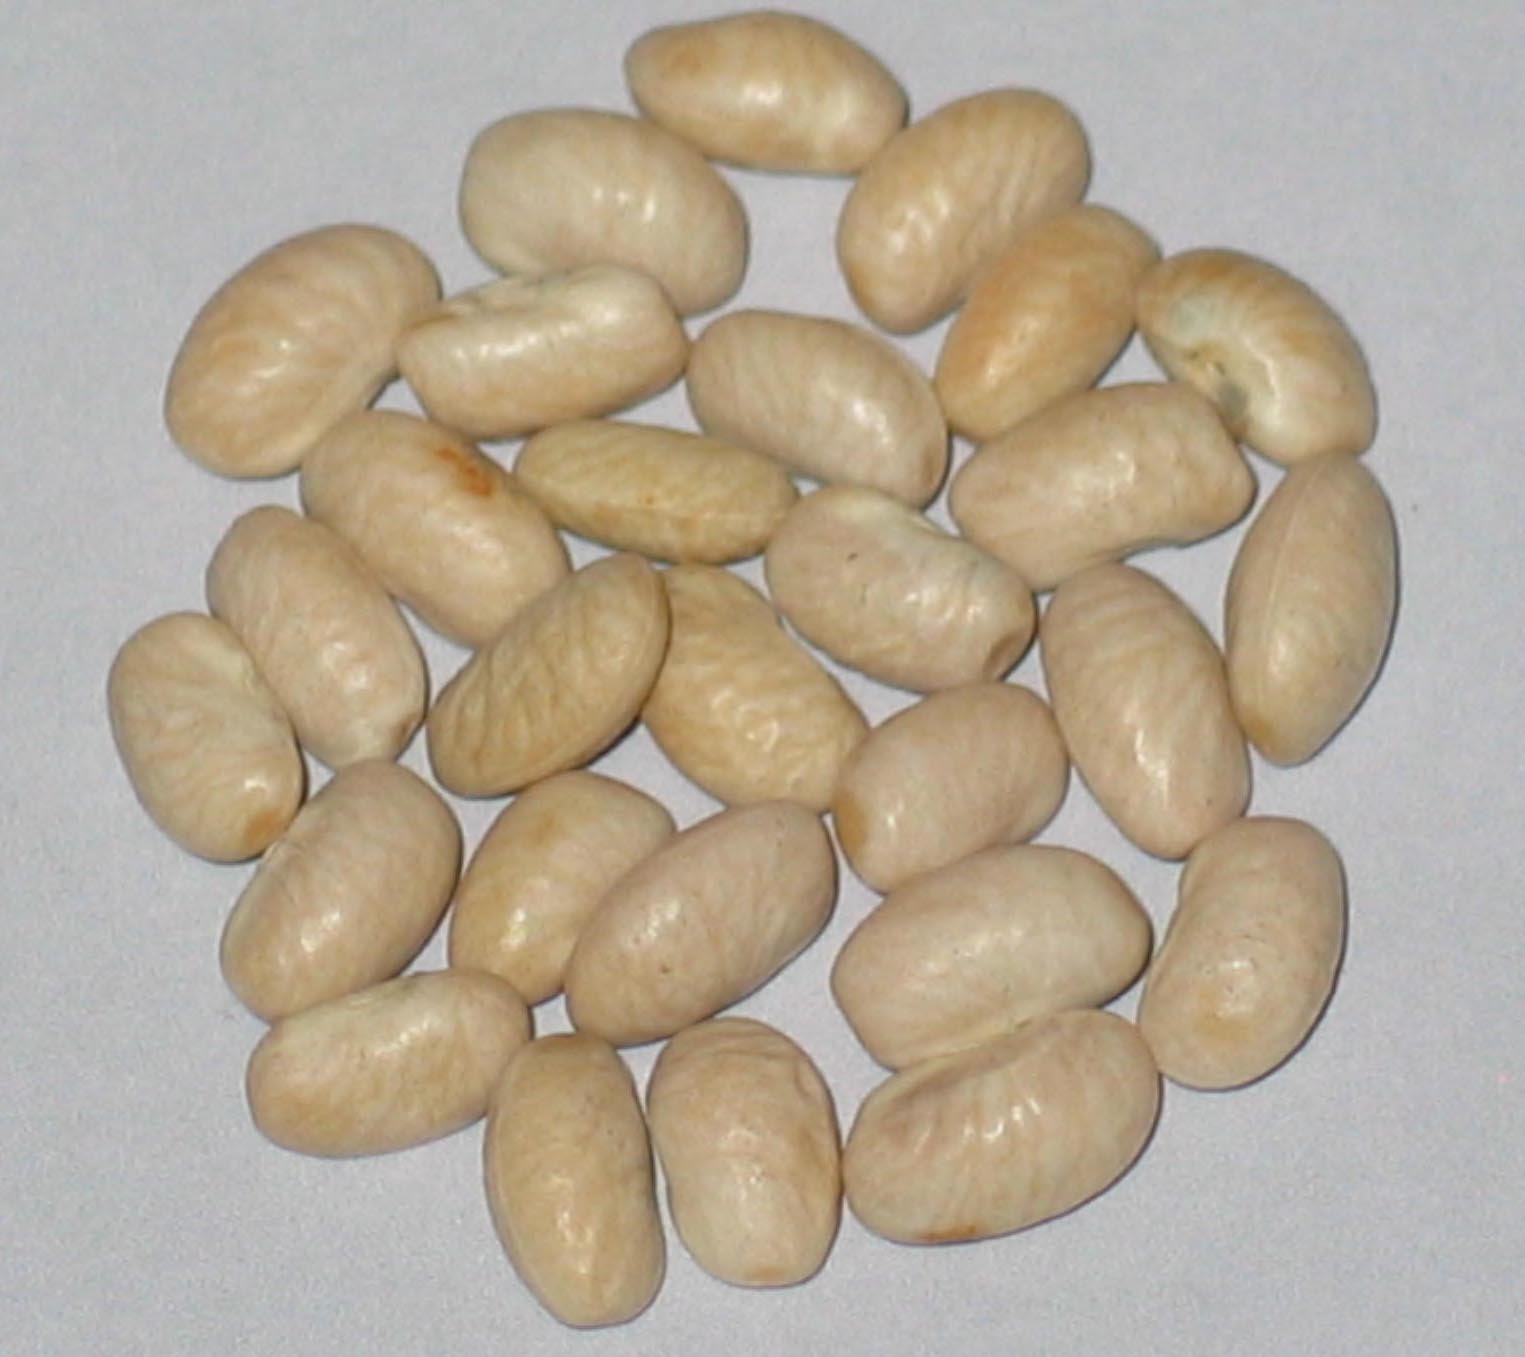 image of Lil Daisy beans